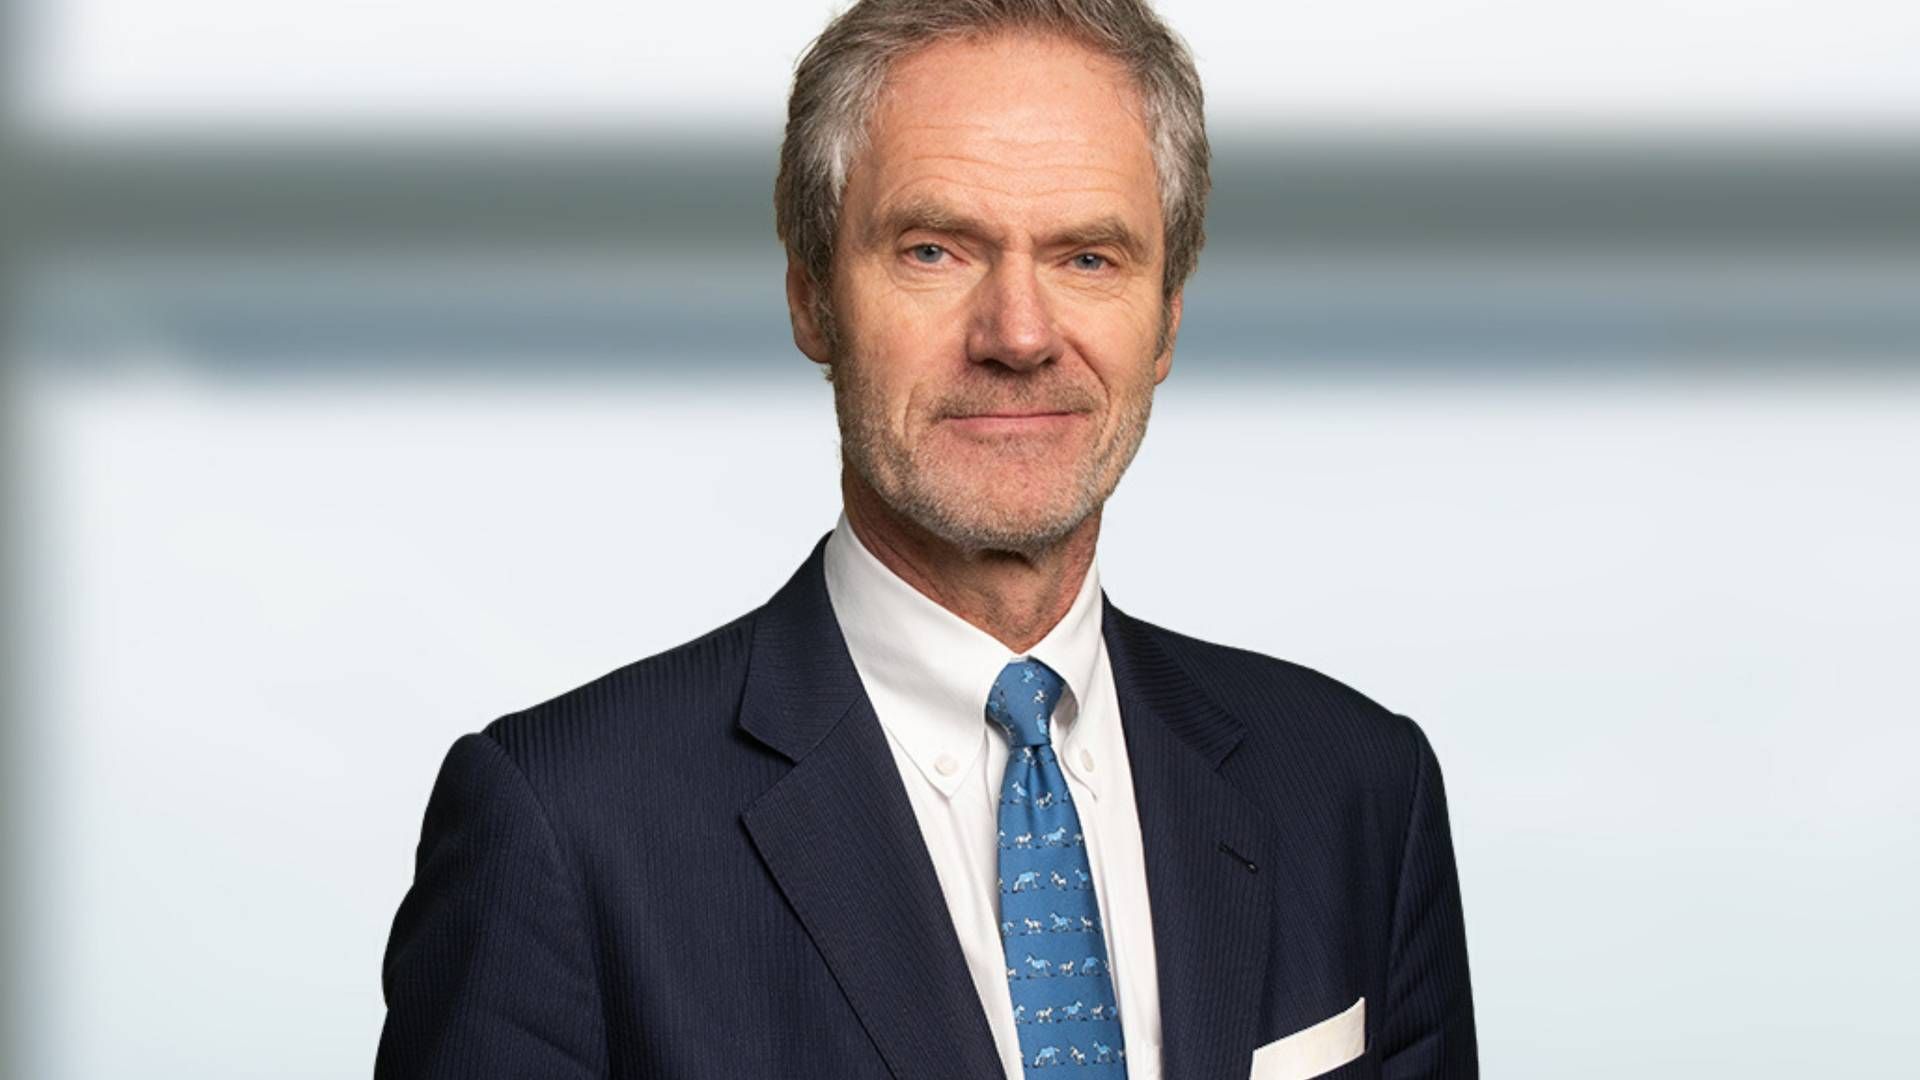 Anders Onarheim has been with BW LPG for 12 years. The last three of these as its CEO. He will resign at the end of September. | Photo: Bw Lpg